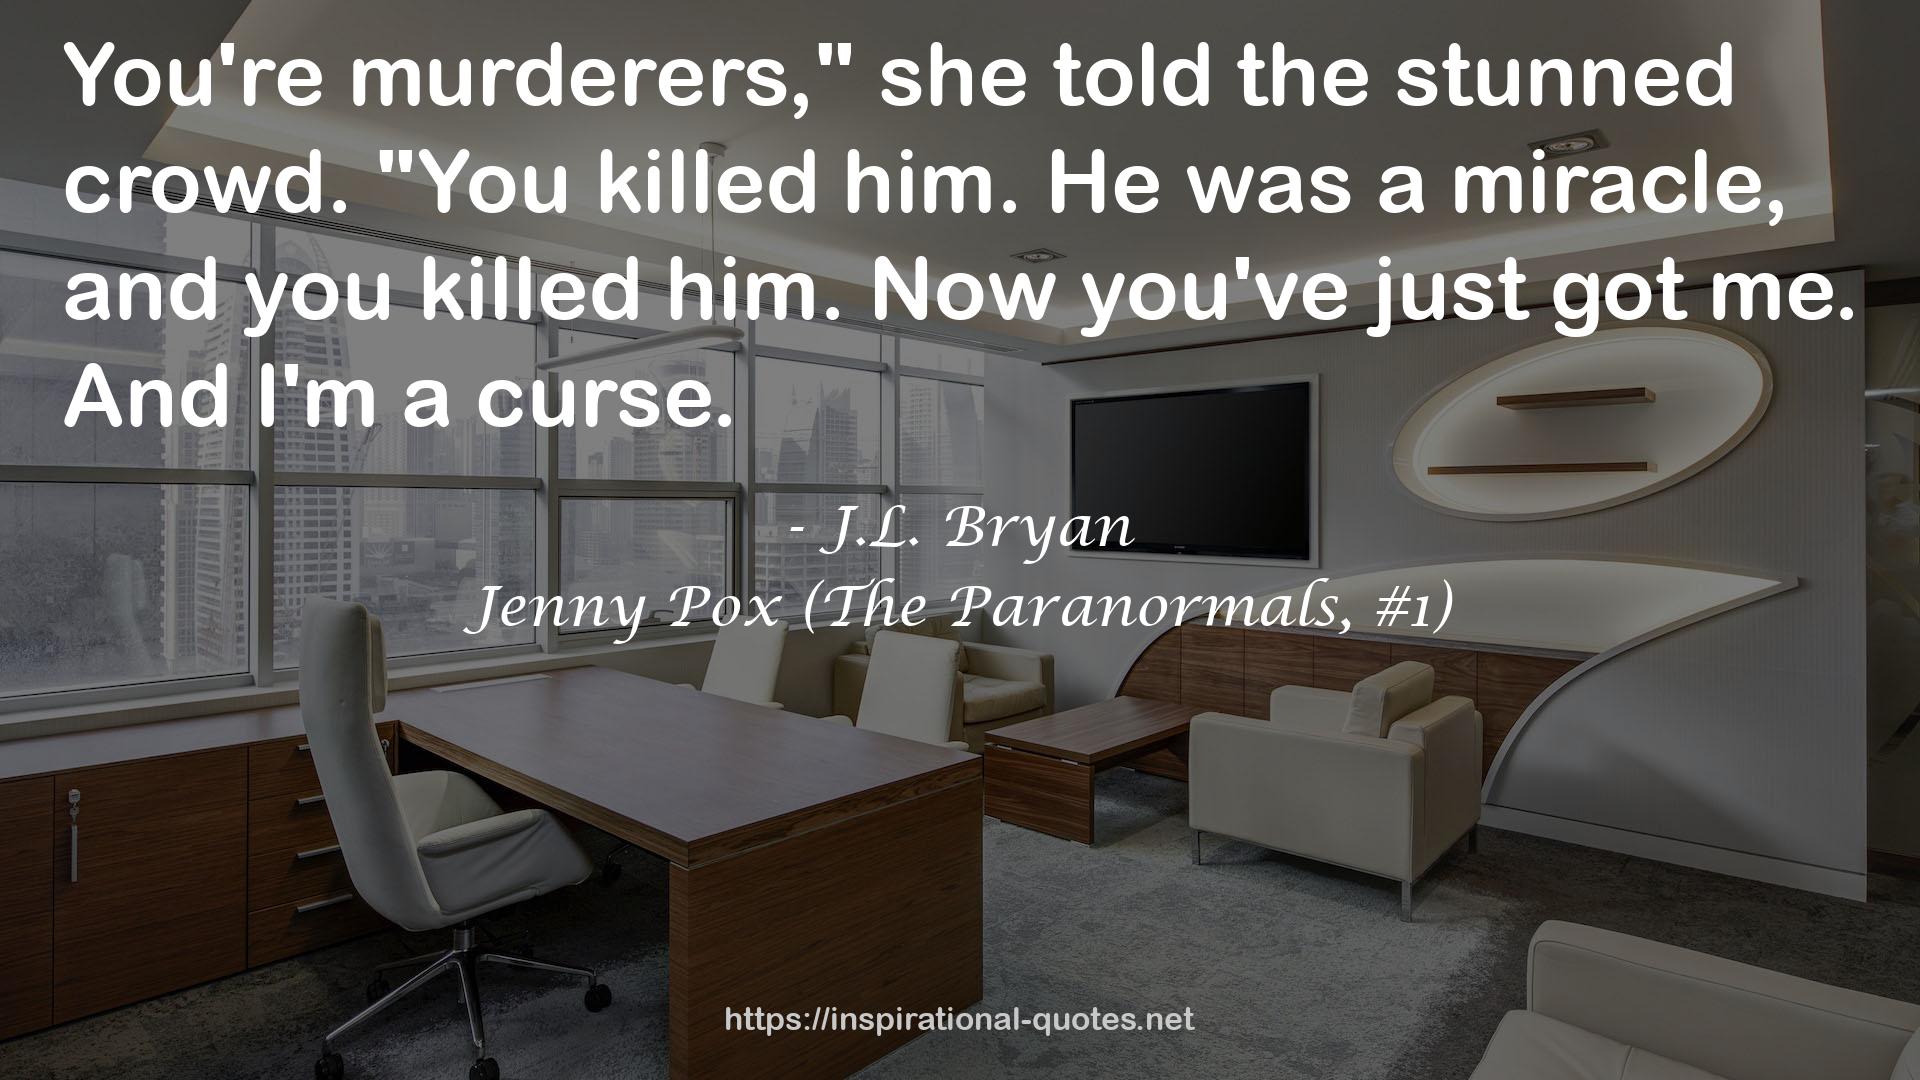 Jenny Pox (The Paranormals, #1) QUOTES